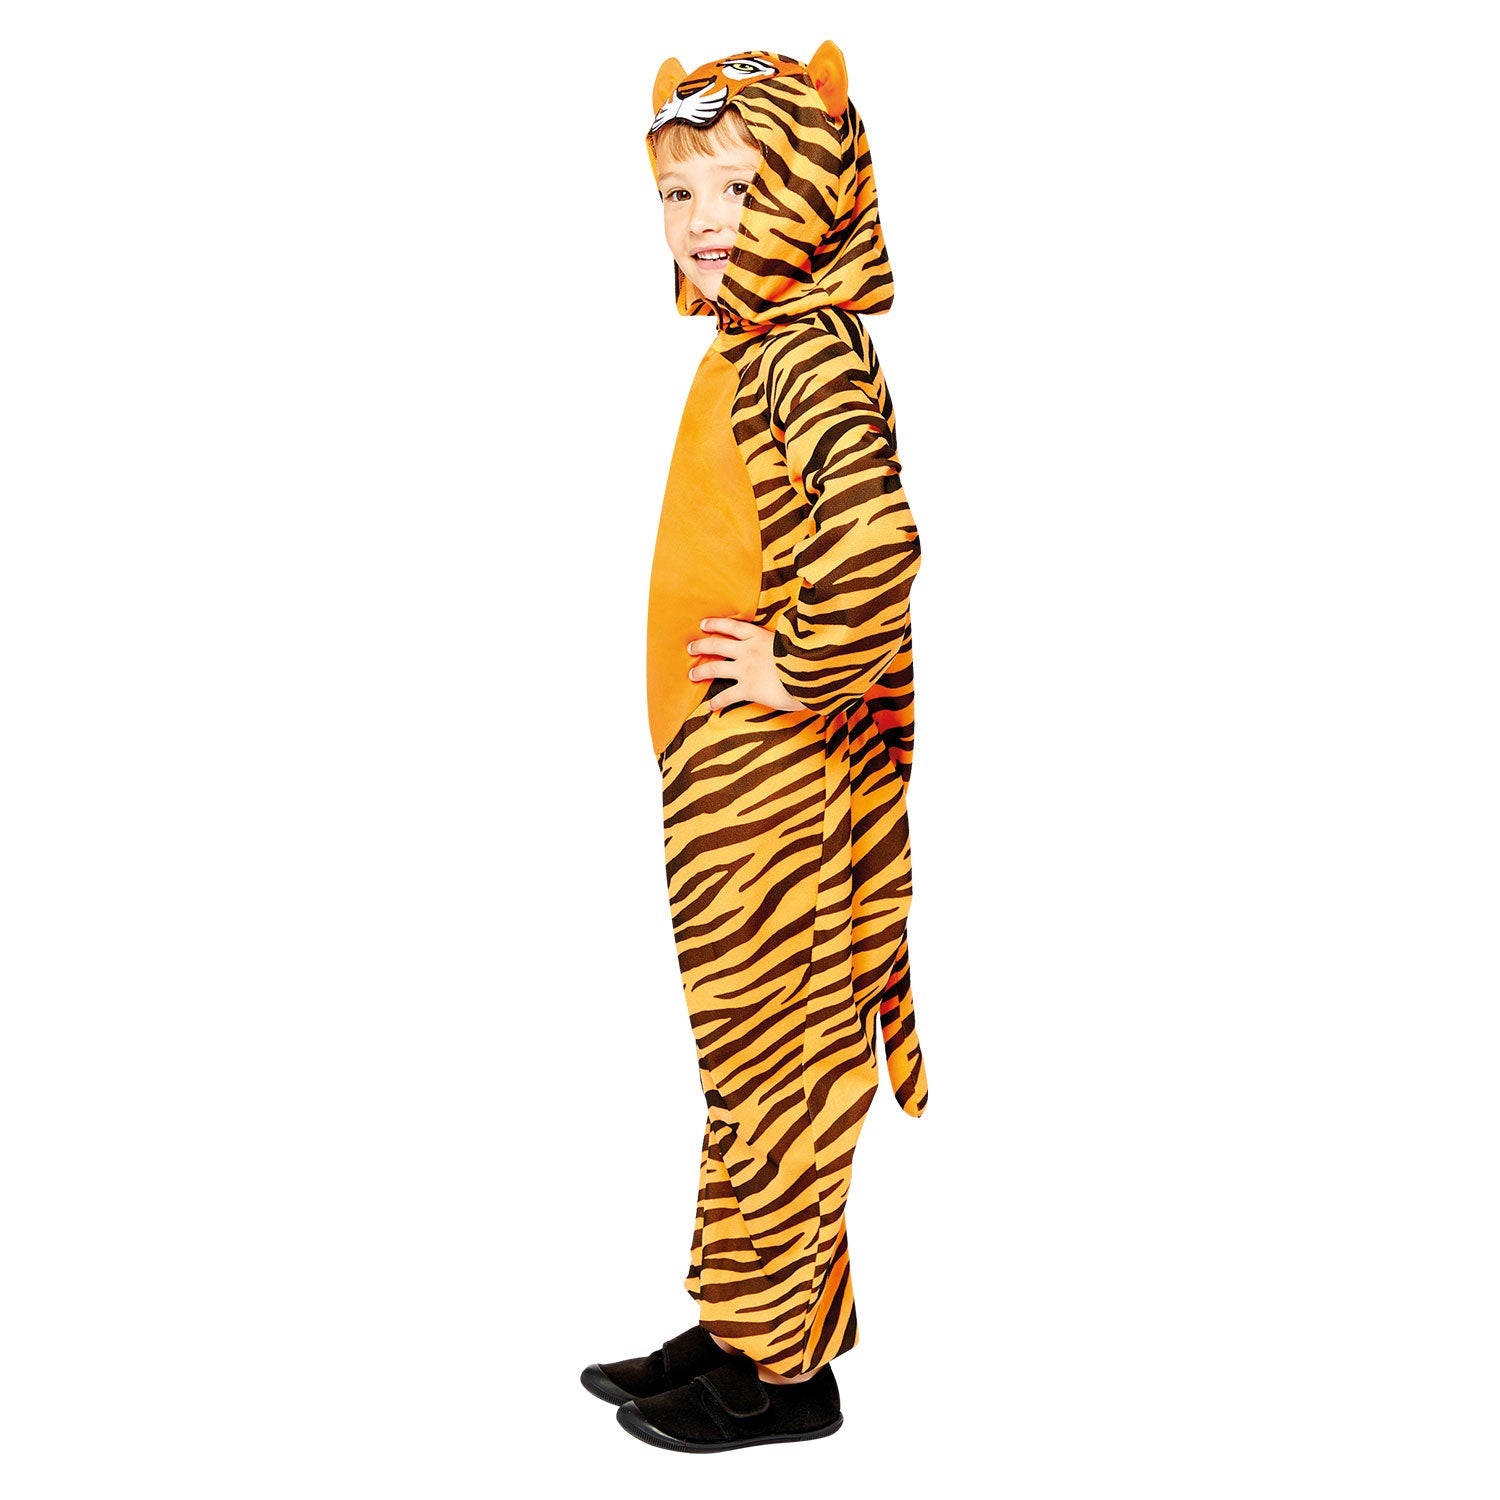 Tiger Onesie Costume includes jumpsuit with hood